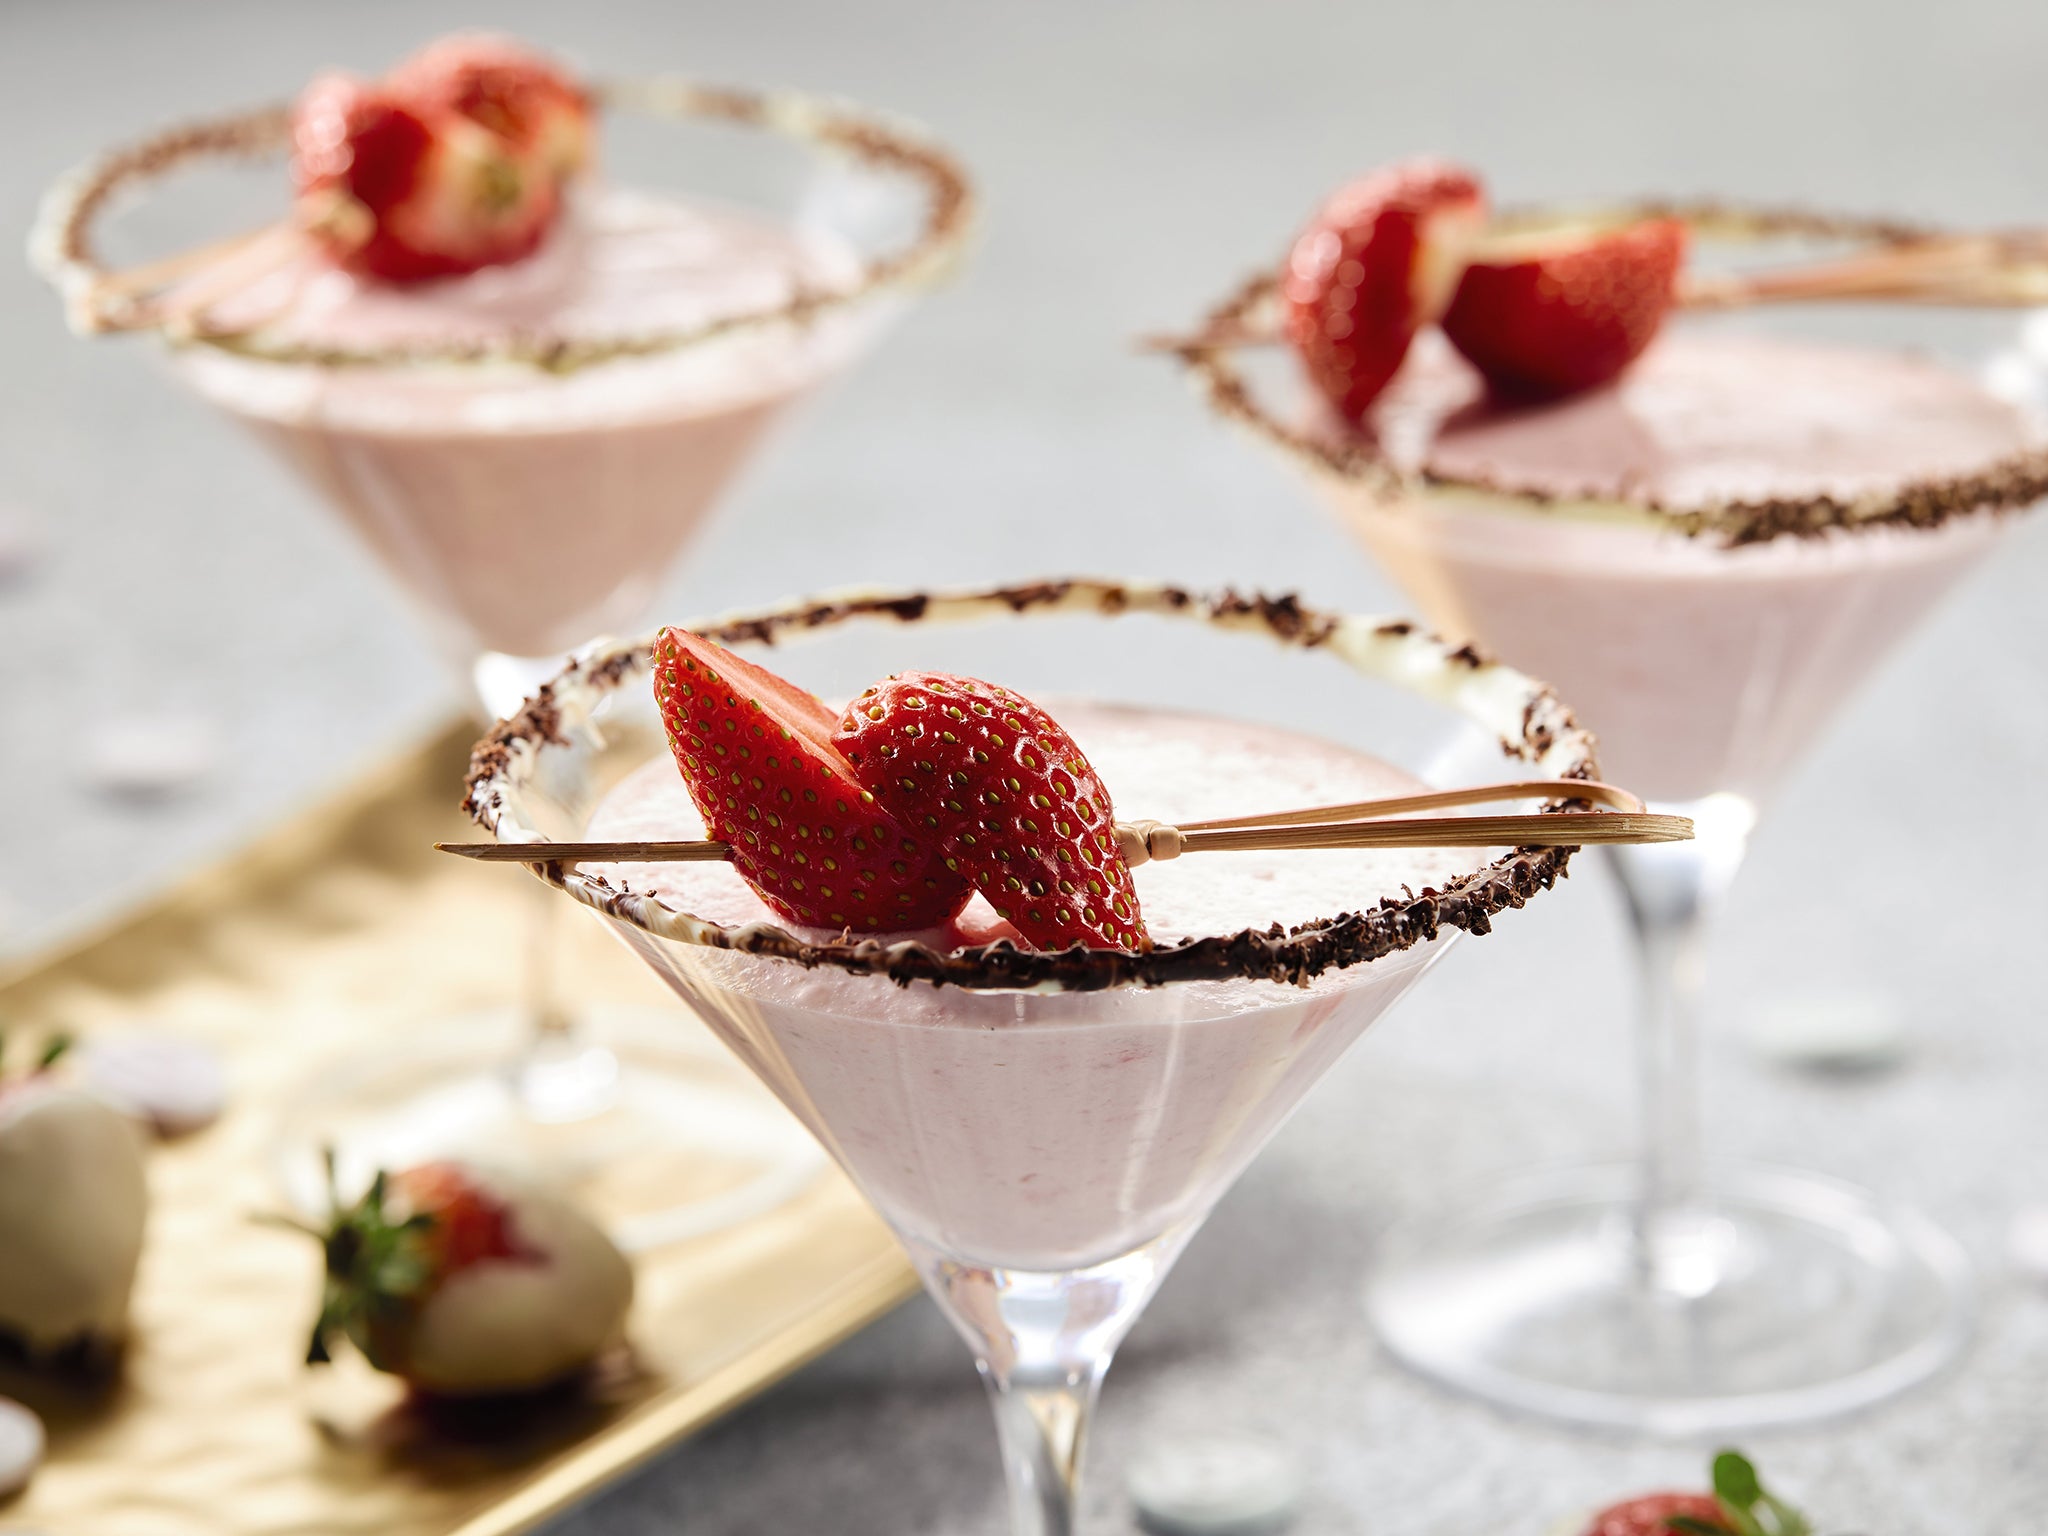 Vanilla martini served with strawberries in a white chocolate dipped cocktail glass